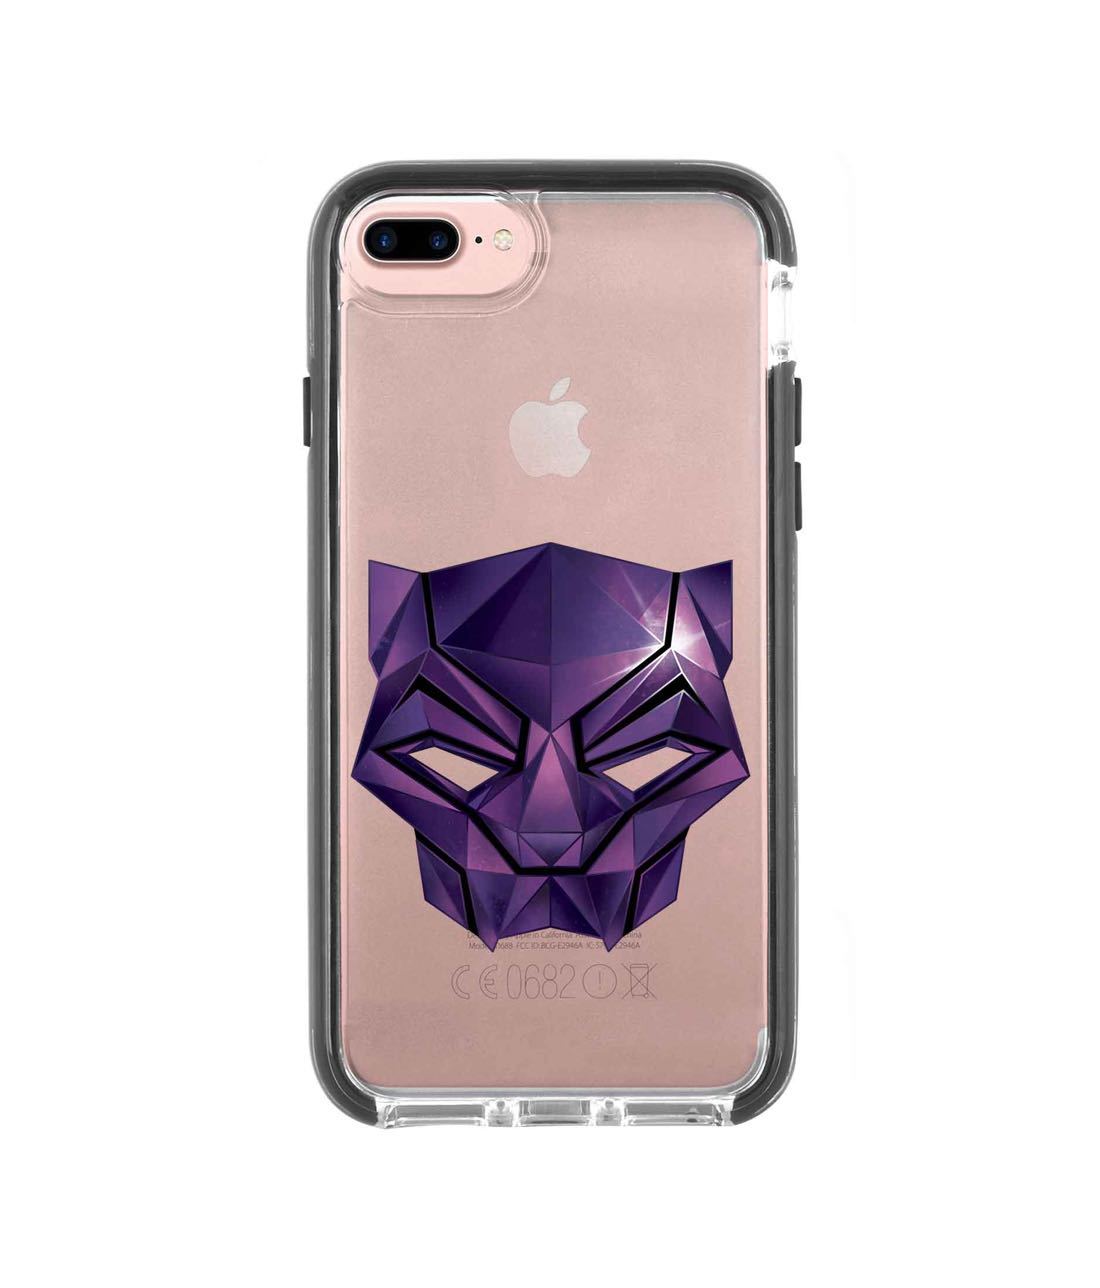 Black Panther Logo - Extreme Phone Case for iPhone 7 Plus